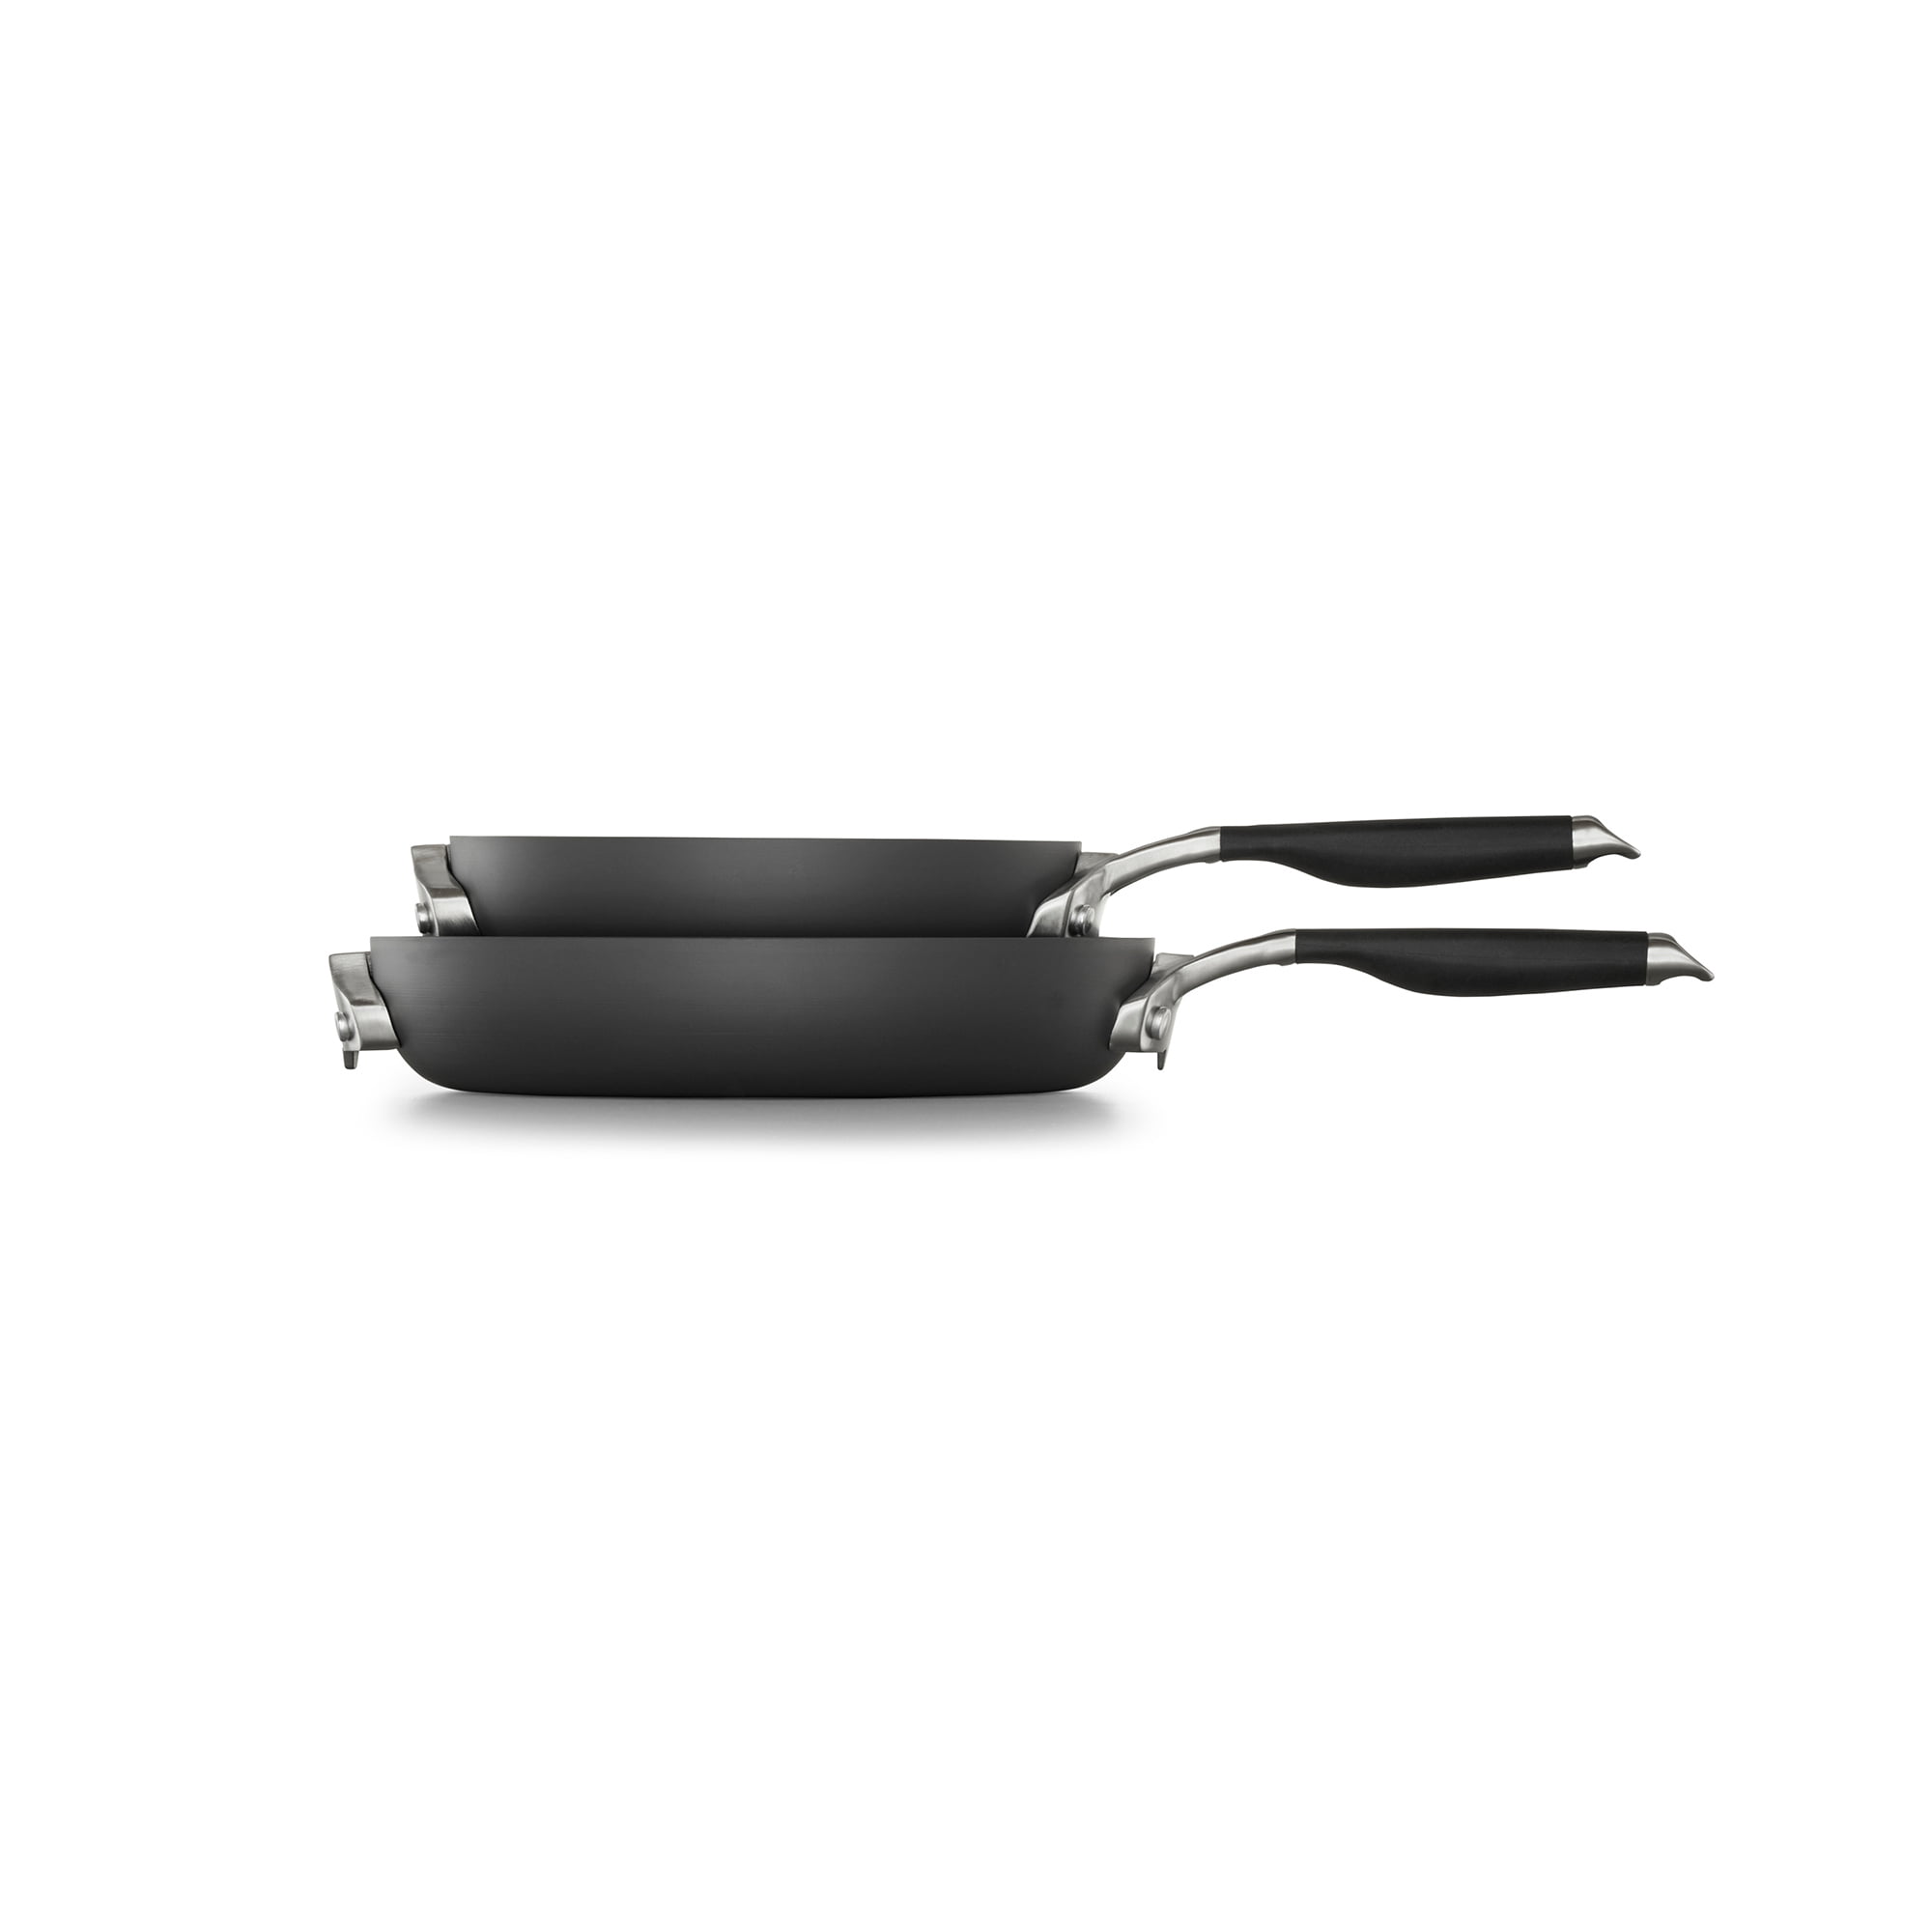 Select by Calphalon® Hard-Anodized Nonstick 8-Inch and 10-Inch Fry Pan Set